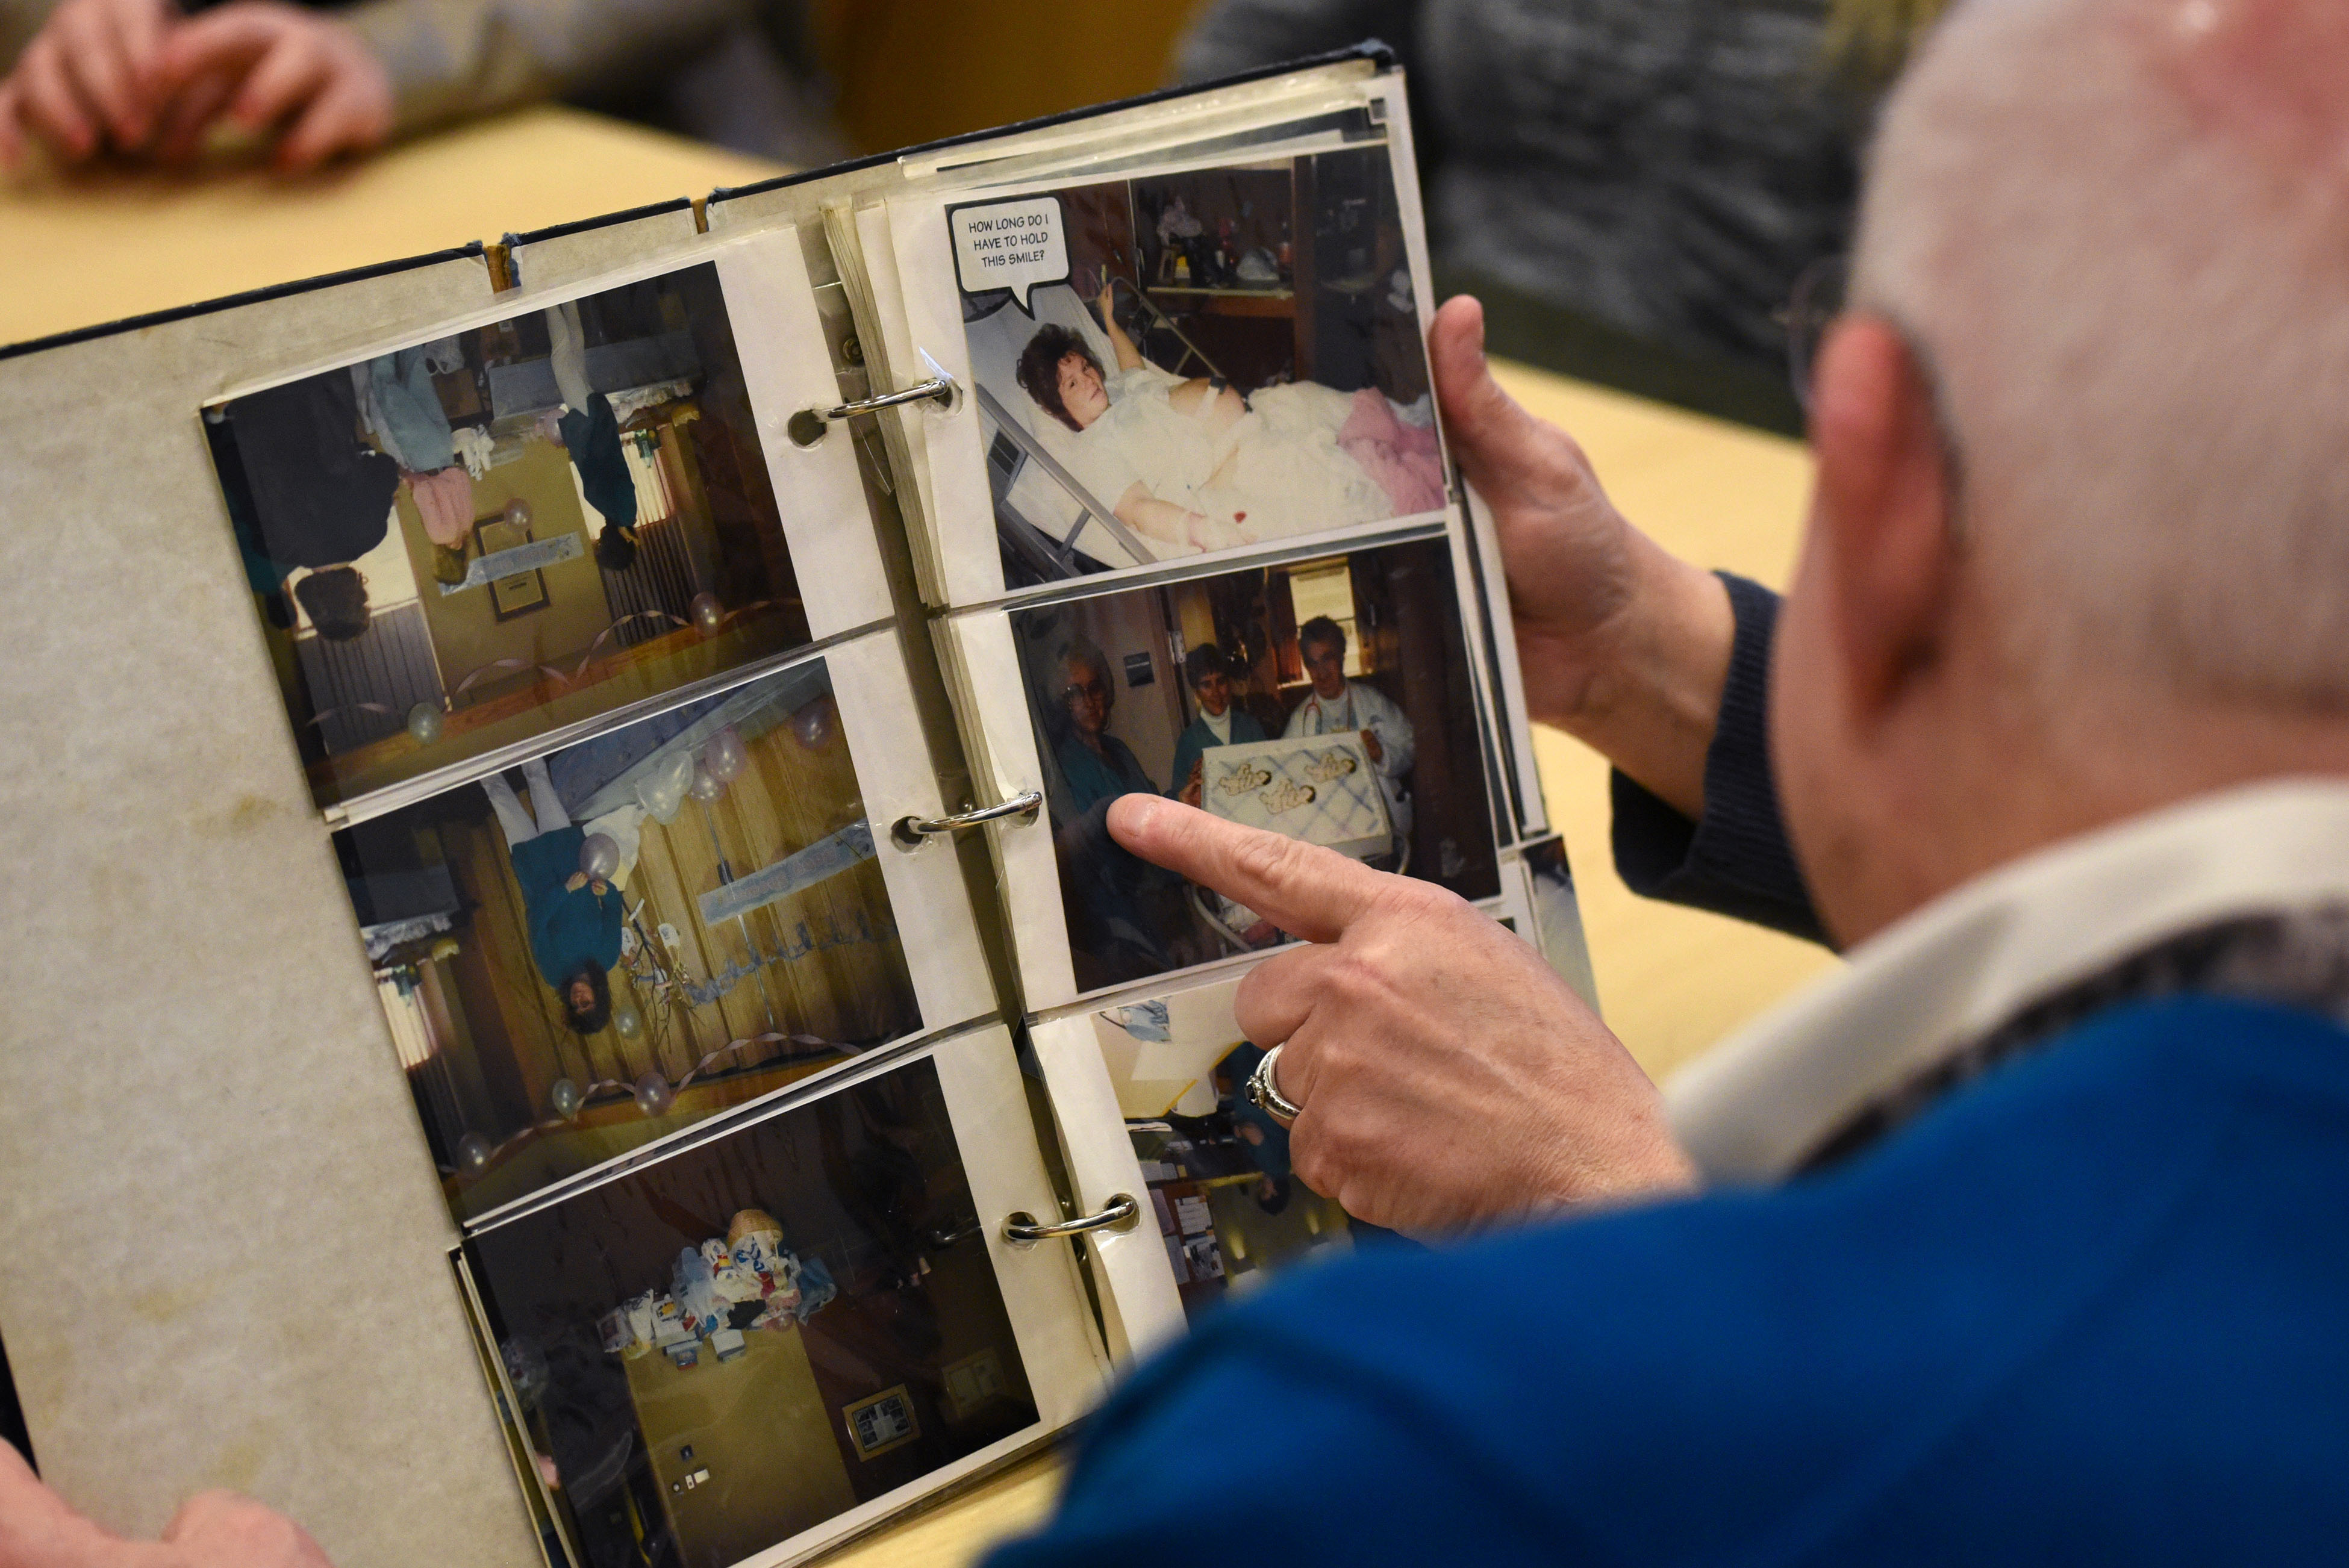 Janet Boyer looks at photo albums with Dr. Anthony Ambrose, FACOG, at Penn State Health Milton S. Hershey Medical Center on Feb. 29, 2020. Boyer is the mom of Beth Ann, Mackenzie and Emily Schneck, leap year triplets born at the hospital on Feb. 29, 1996. They came back on their “sixth” birthday to tour the new children’s hospital expansion.